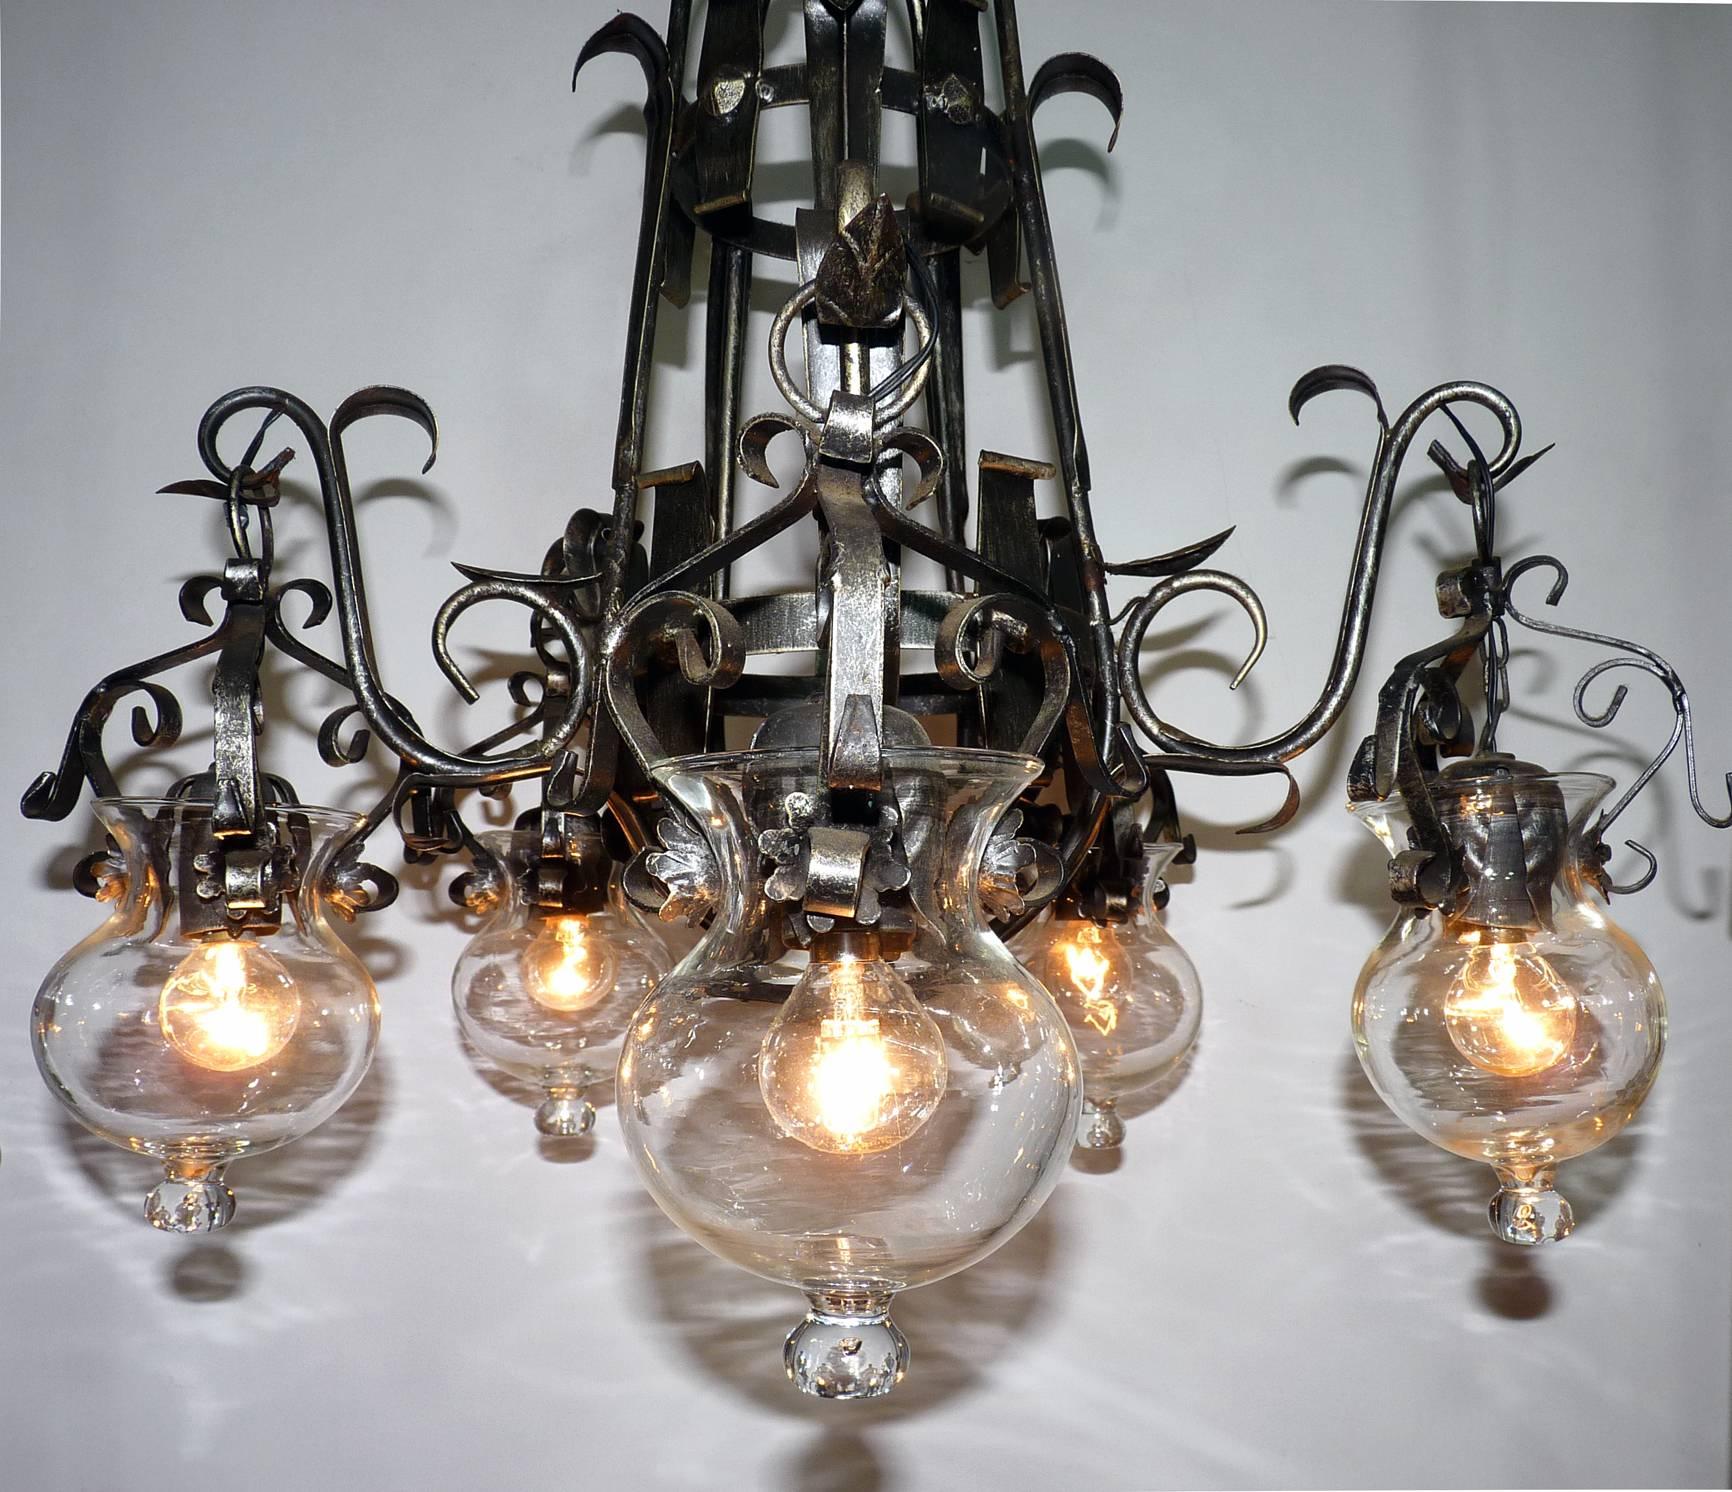 Unusual French forged iron and tole cage-form chandelier with five-hanging light glass globes. Black color in a silver finish. Original hand blown clear glass globes with tear drop.
Measures:
Diameter 28 in / 70 cm
Height 28 in / 70 cm
Weight 13 lb.